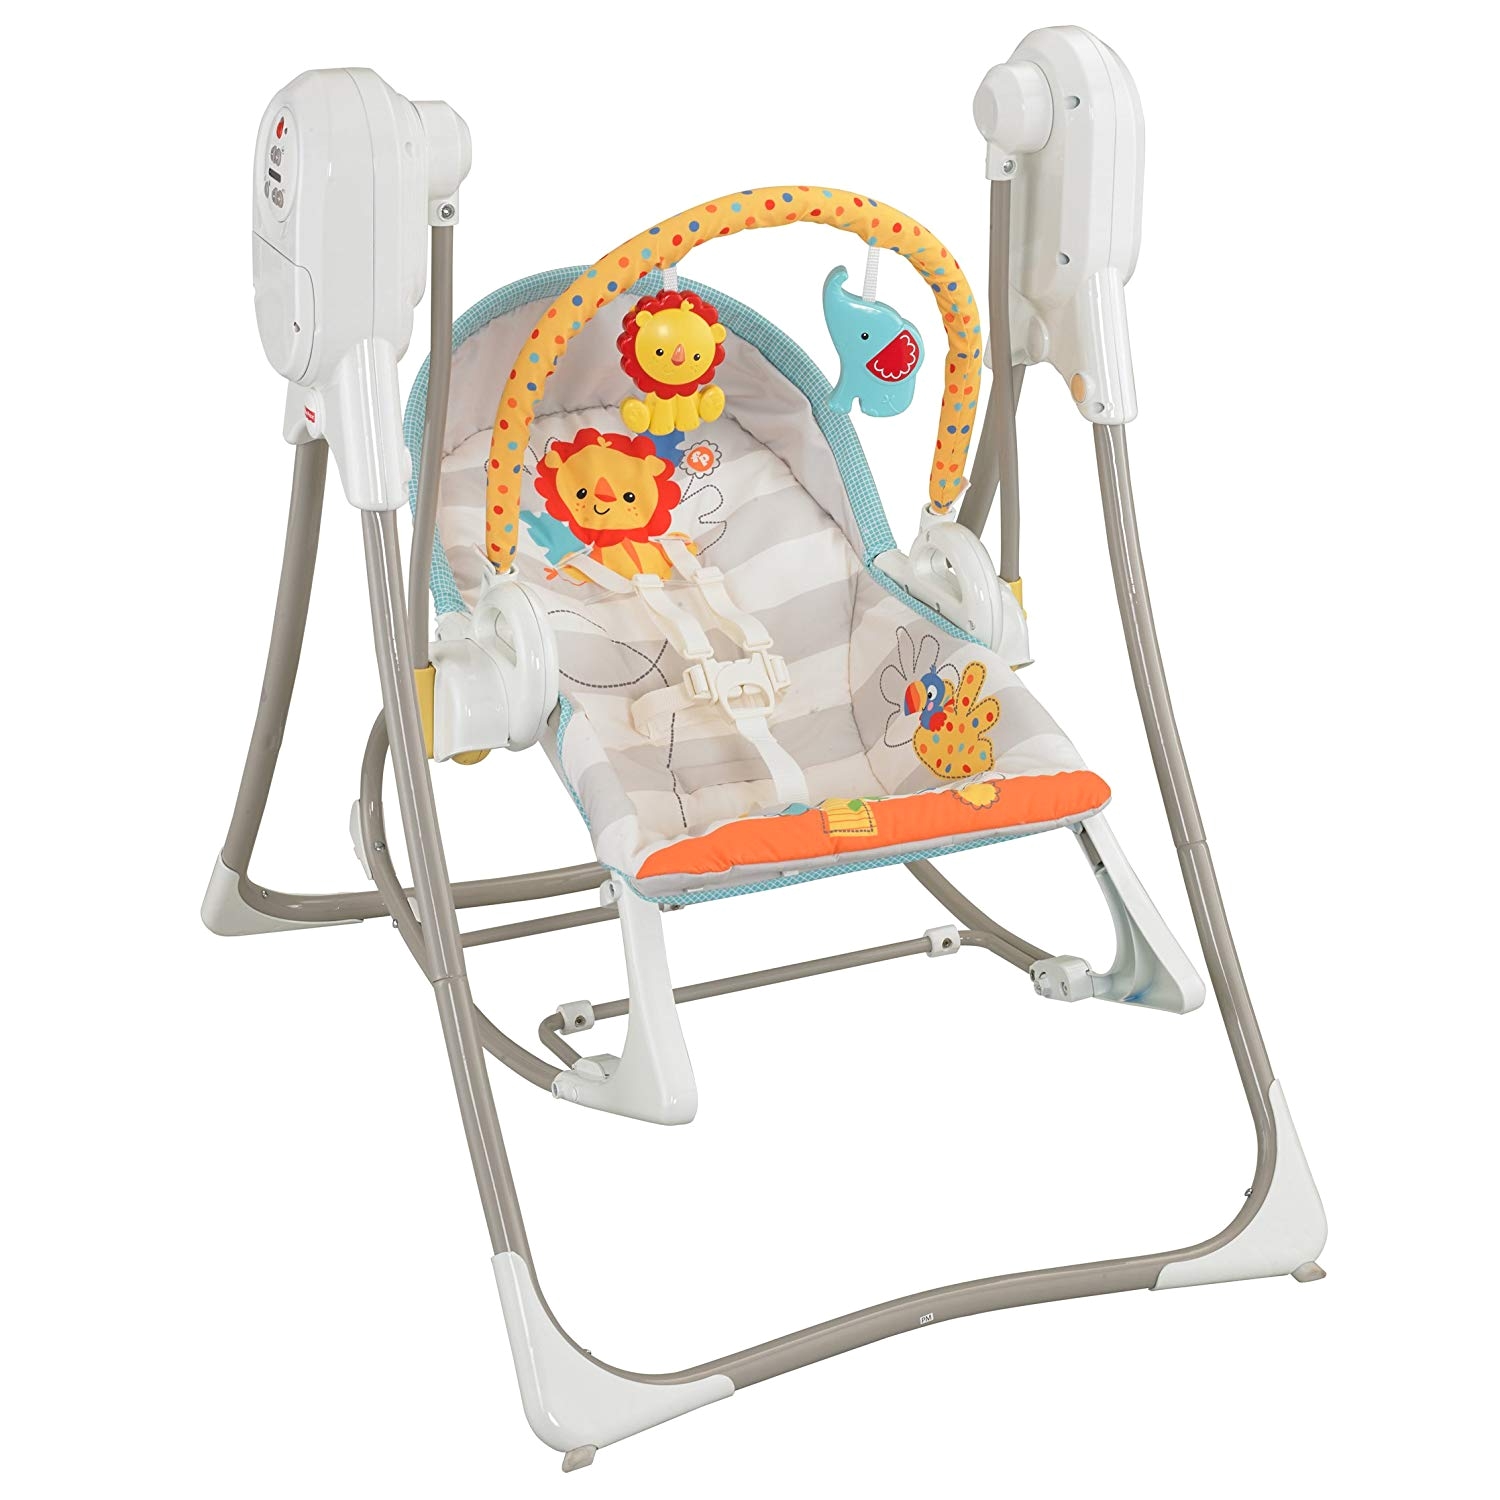 Fisher Price 4 In 1 High Chair Australia Fisher Price Bfh06 3 In 1 Swing N Rocker New Born Baby Swing Chair